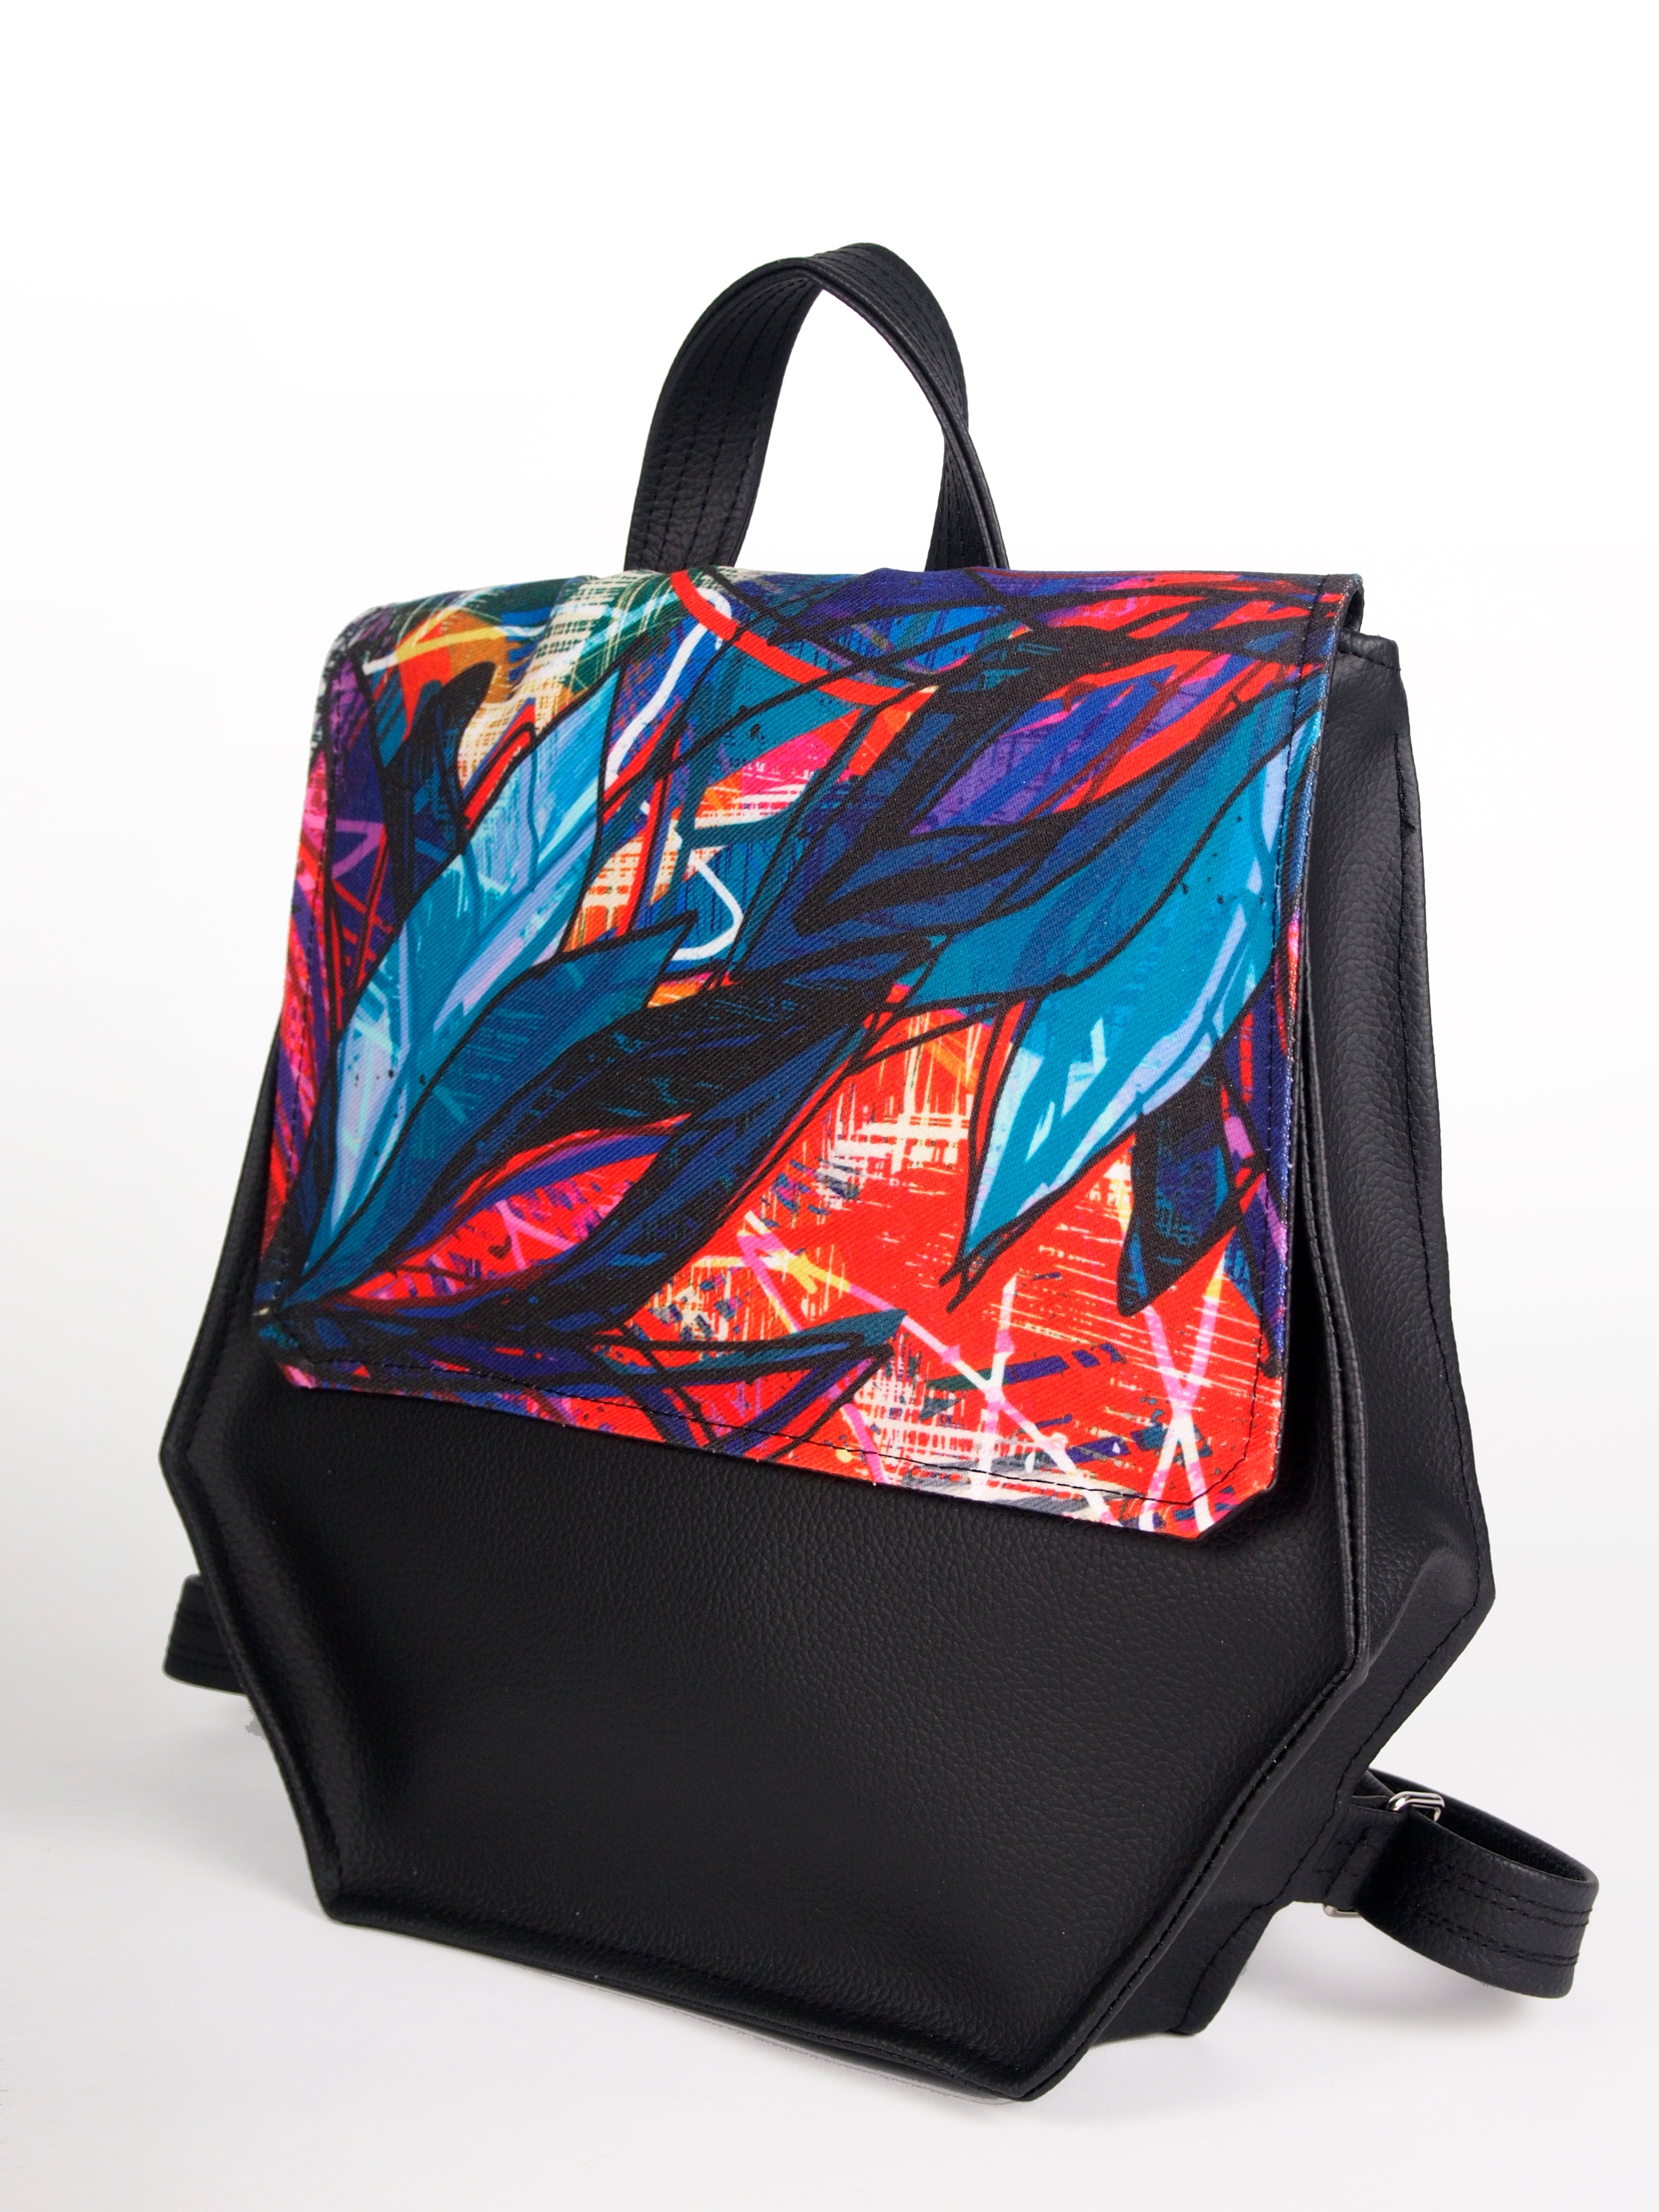 Bardo backpack honey cell - Blue Water Lily - Premium backpack honey cell from BARDO ART WORKS - Just lvBlue Water Lily, dark blue, flowers, red65.00! Shop now at BARDO ART WORKS